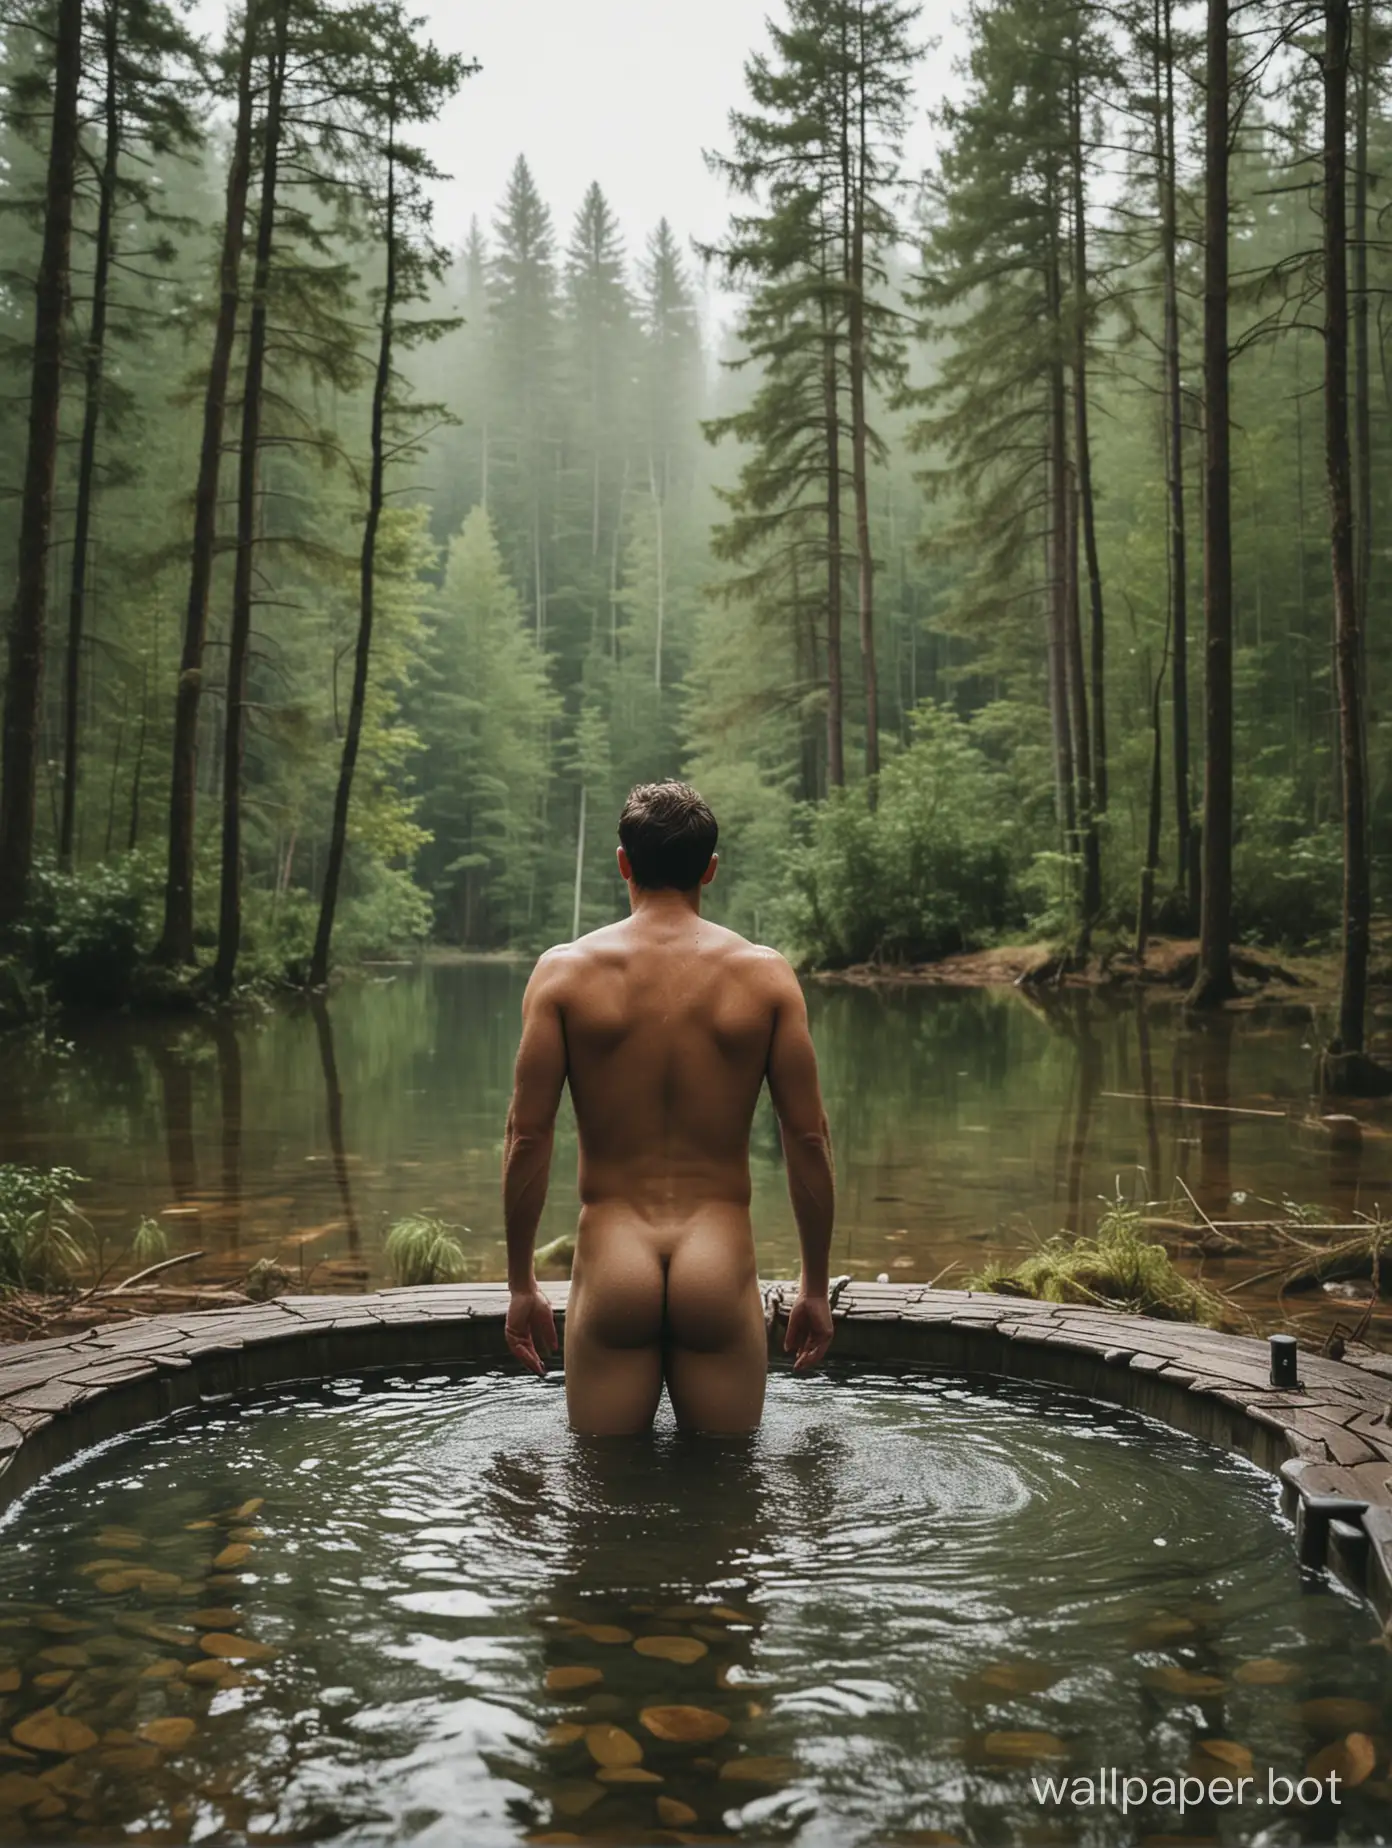 Nude-Man-Standing-in-WaterFilled-Bathtub-Amidst-Serene-Forest-Landscape